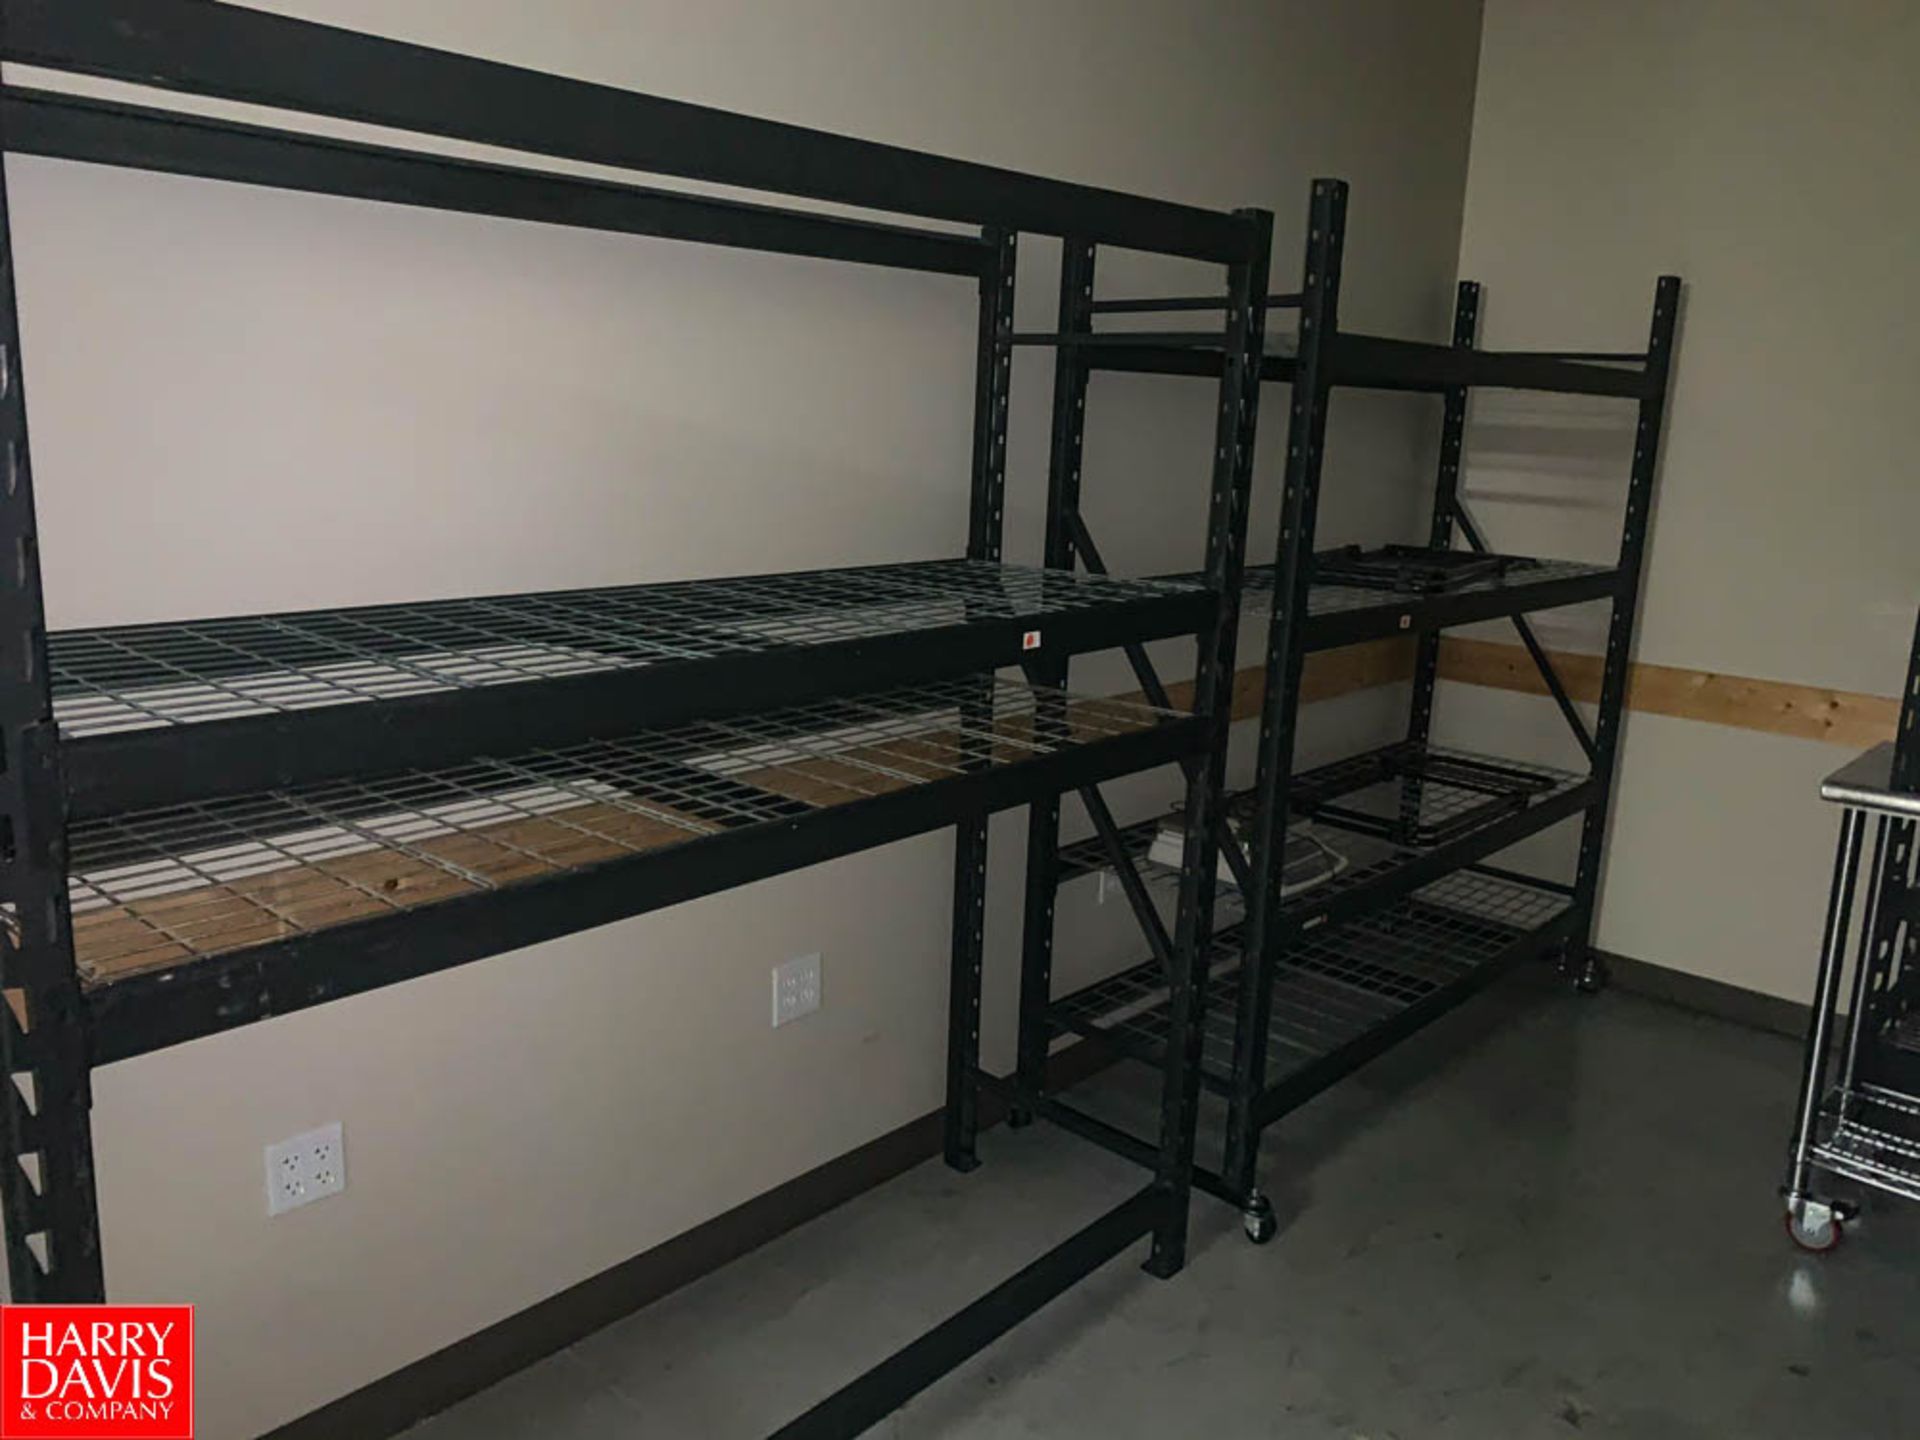 2 Sections Rack Rigging: $250